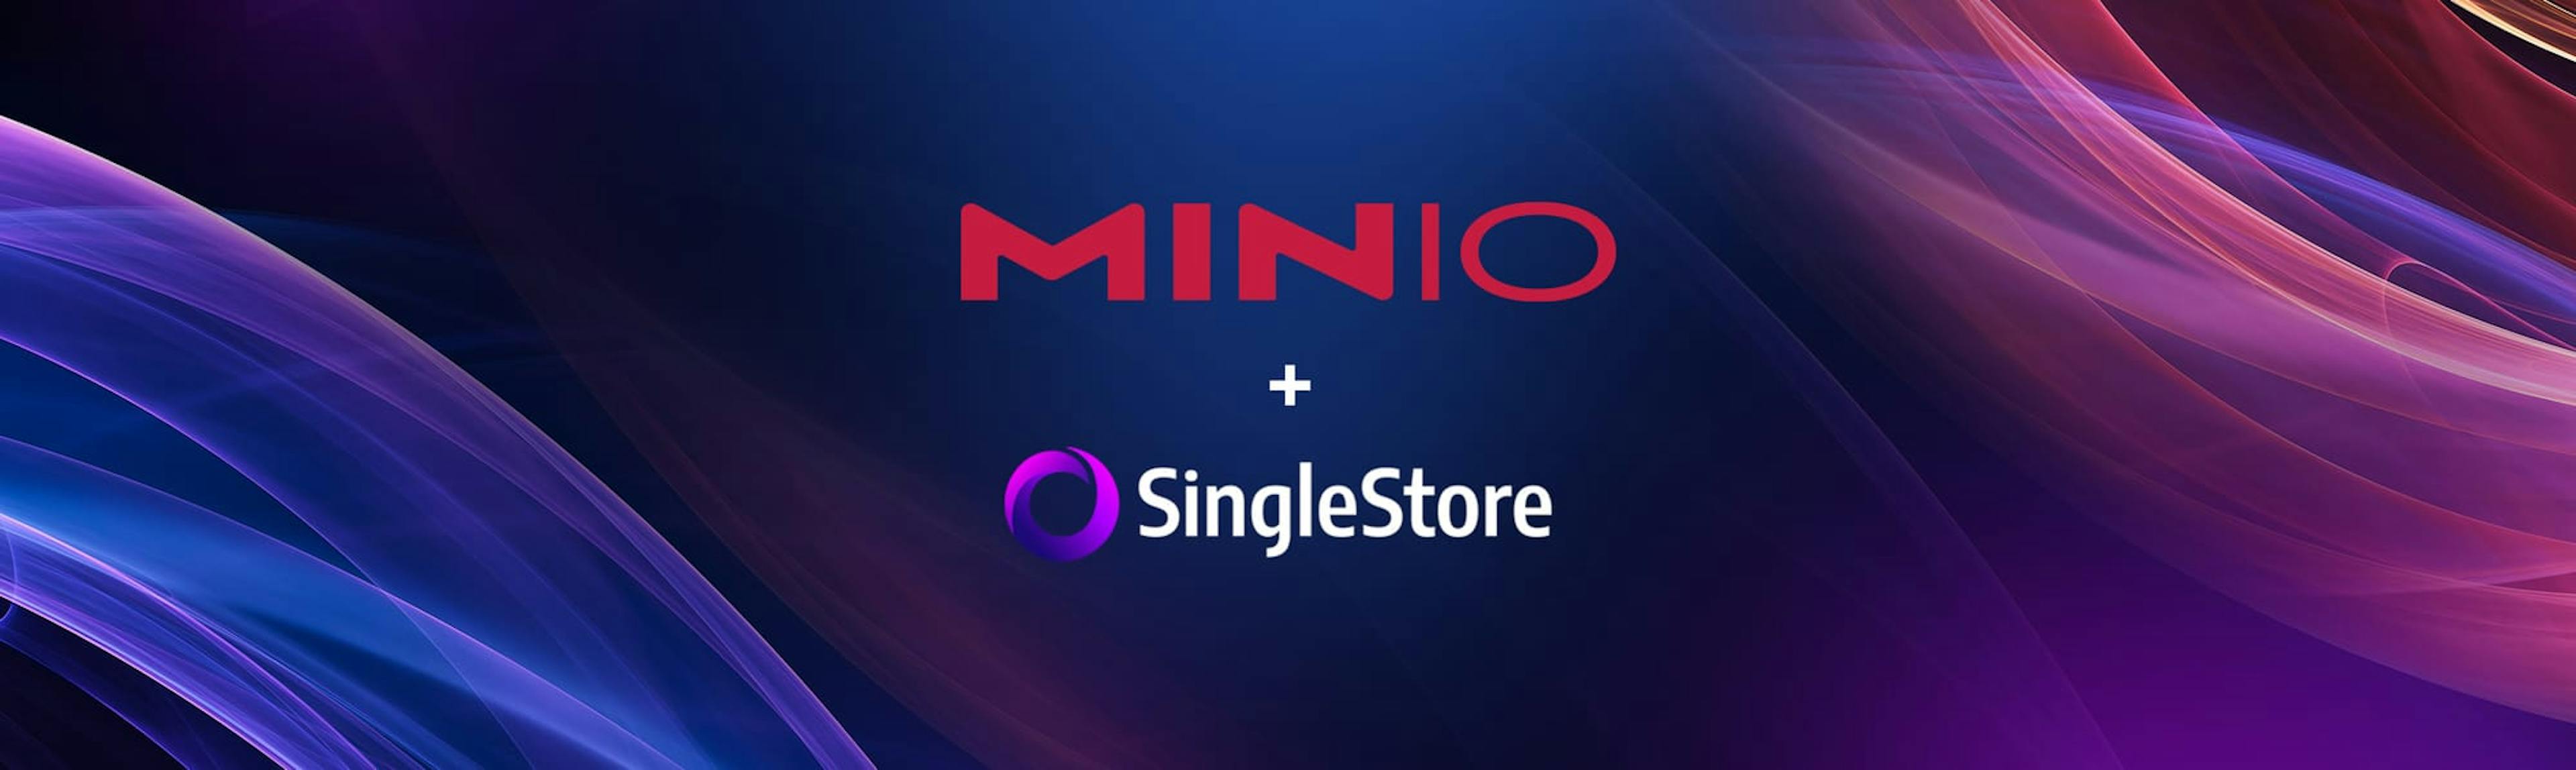 featured image - Developing Next-Gen Data Solutions: SingleStore, MinIO, and the Modern Datalake Stack